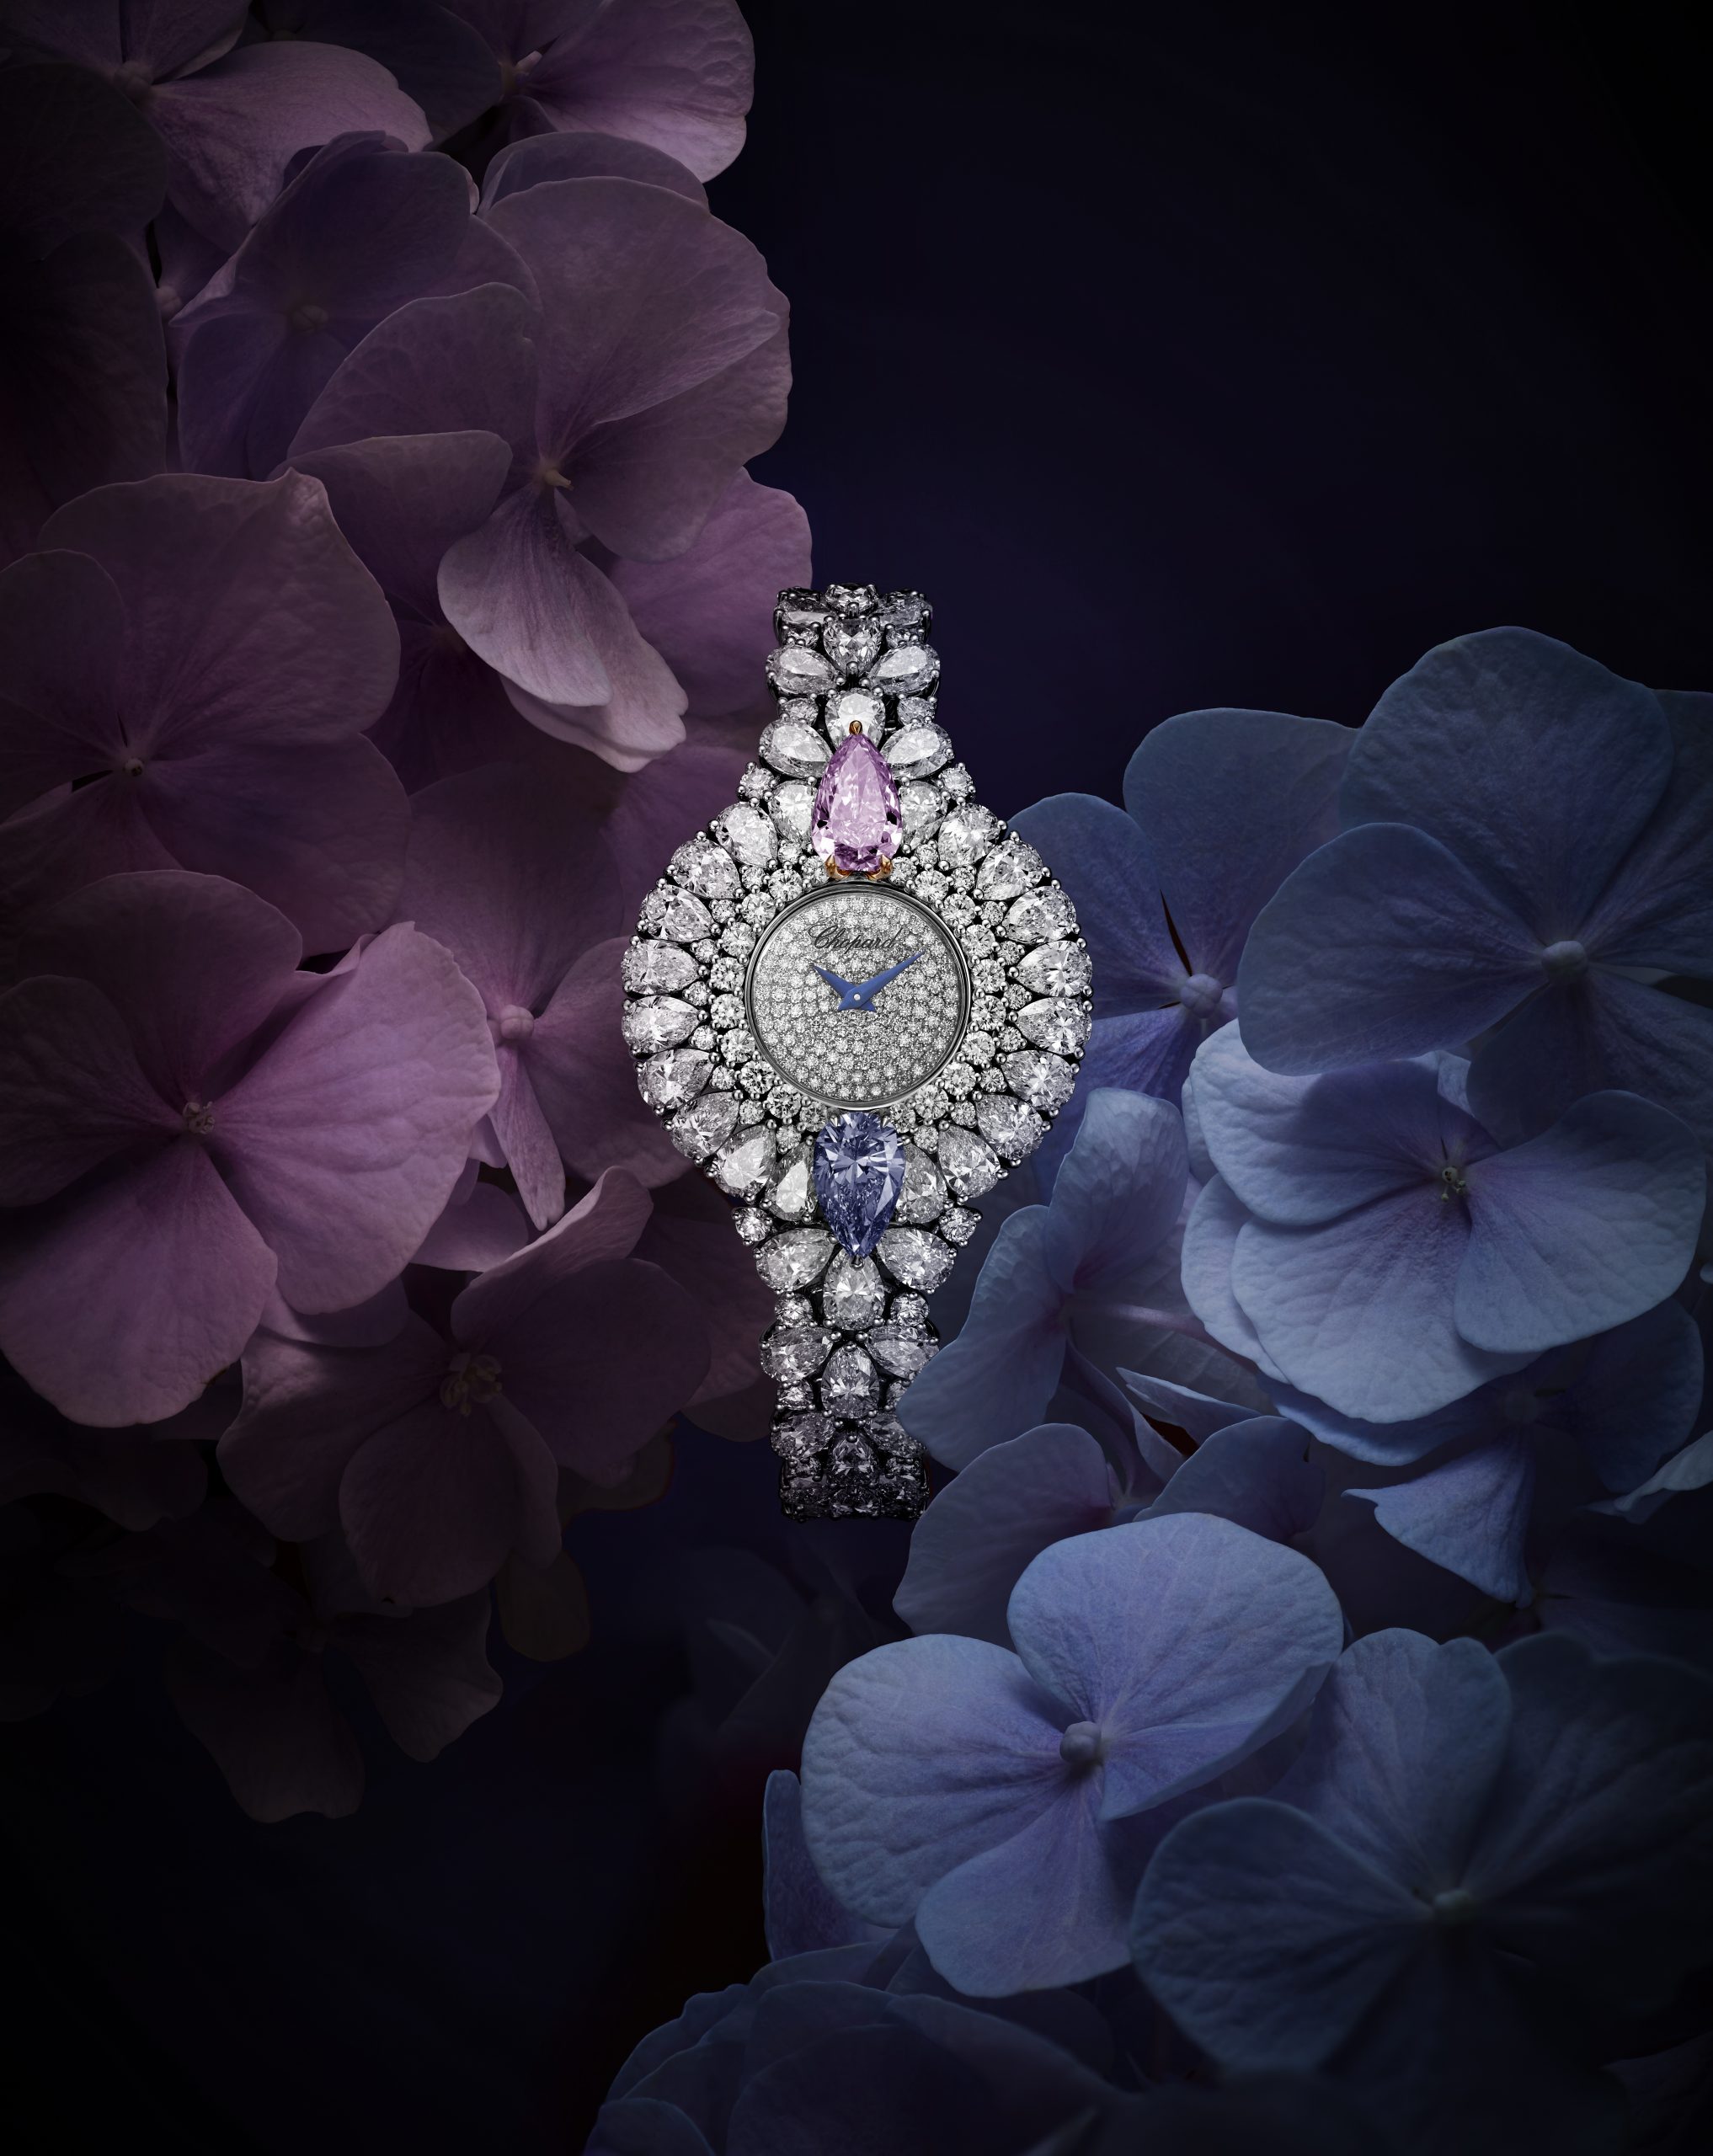 Astonishing $5.7 million ladies watch by Chopard is the stand out in recent Red Carpet Collection